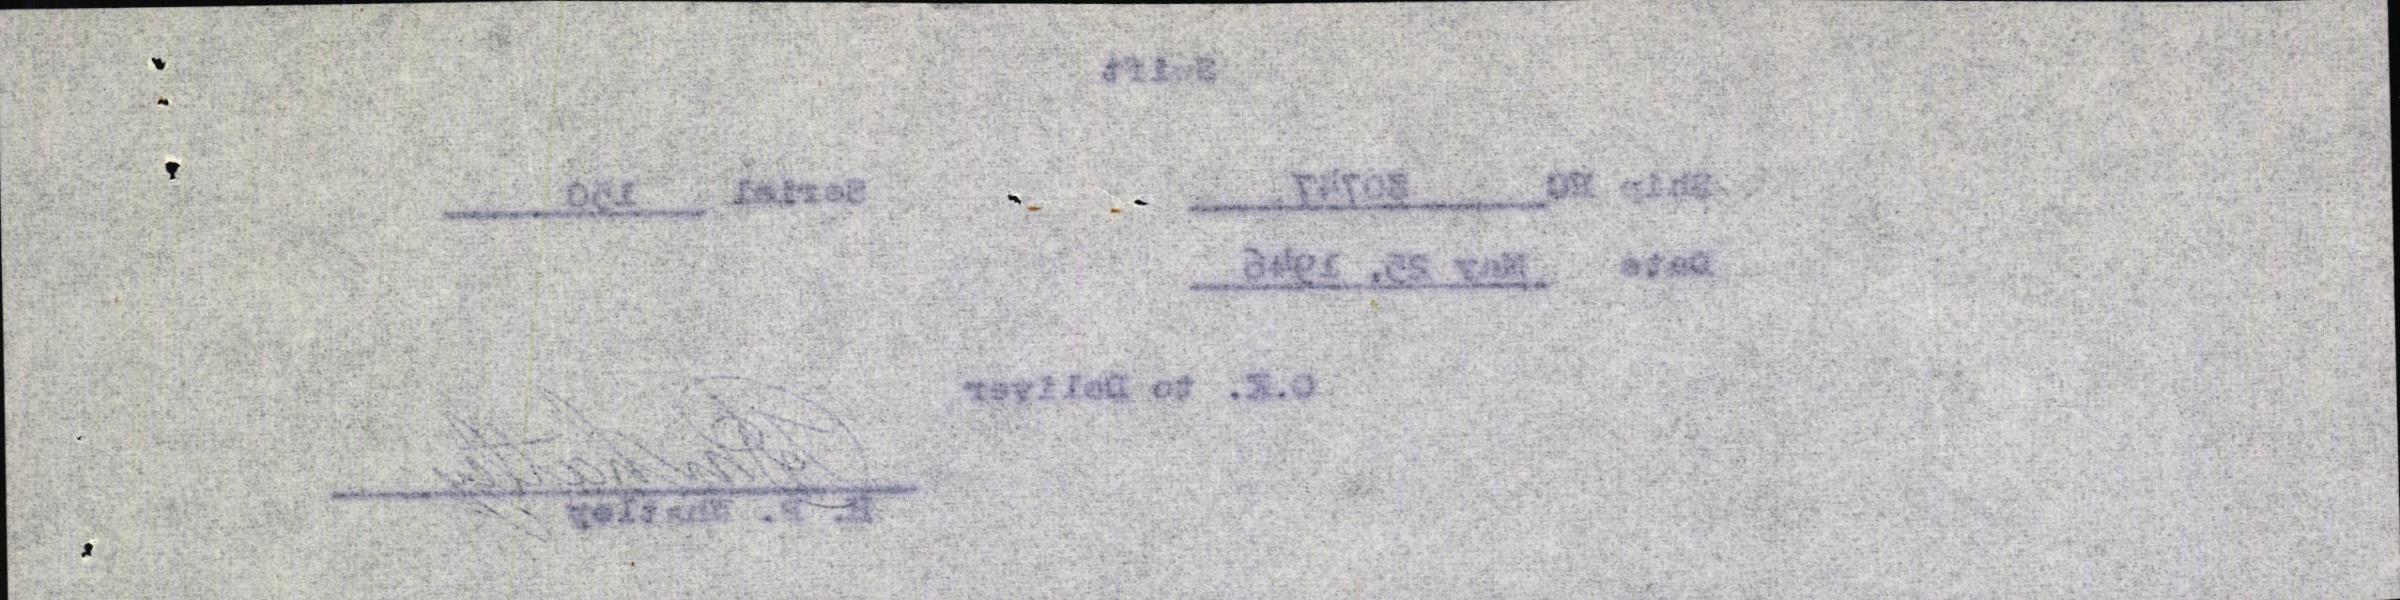 Sample page 4 from AirCorps Library document: Technical Information for Serial Number 150